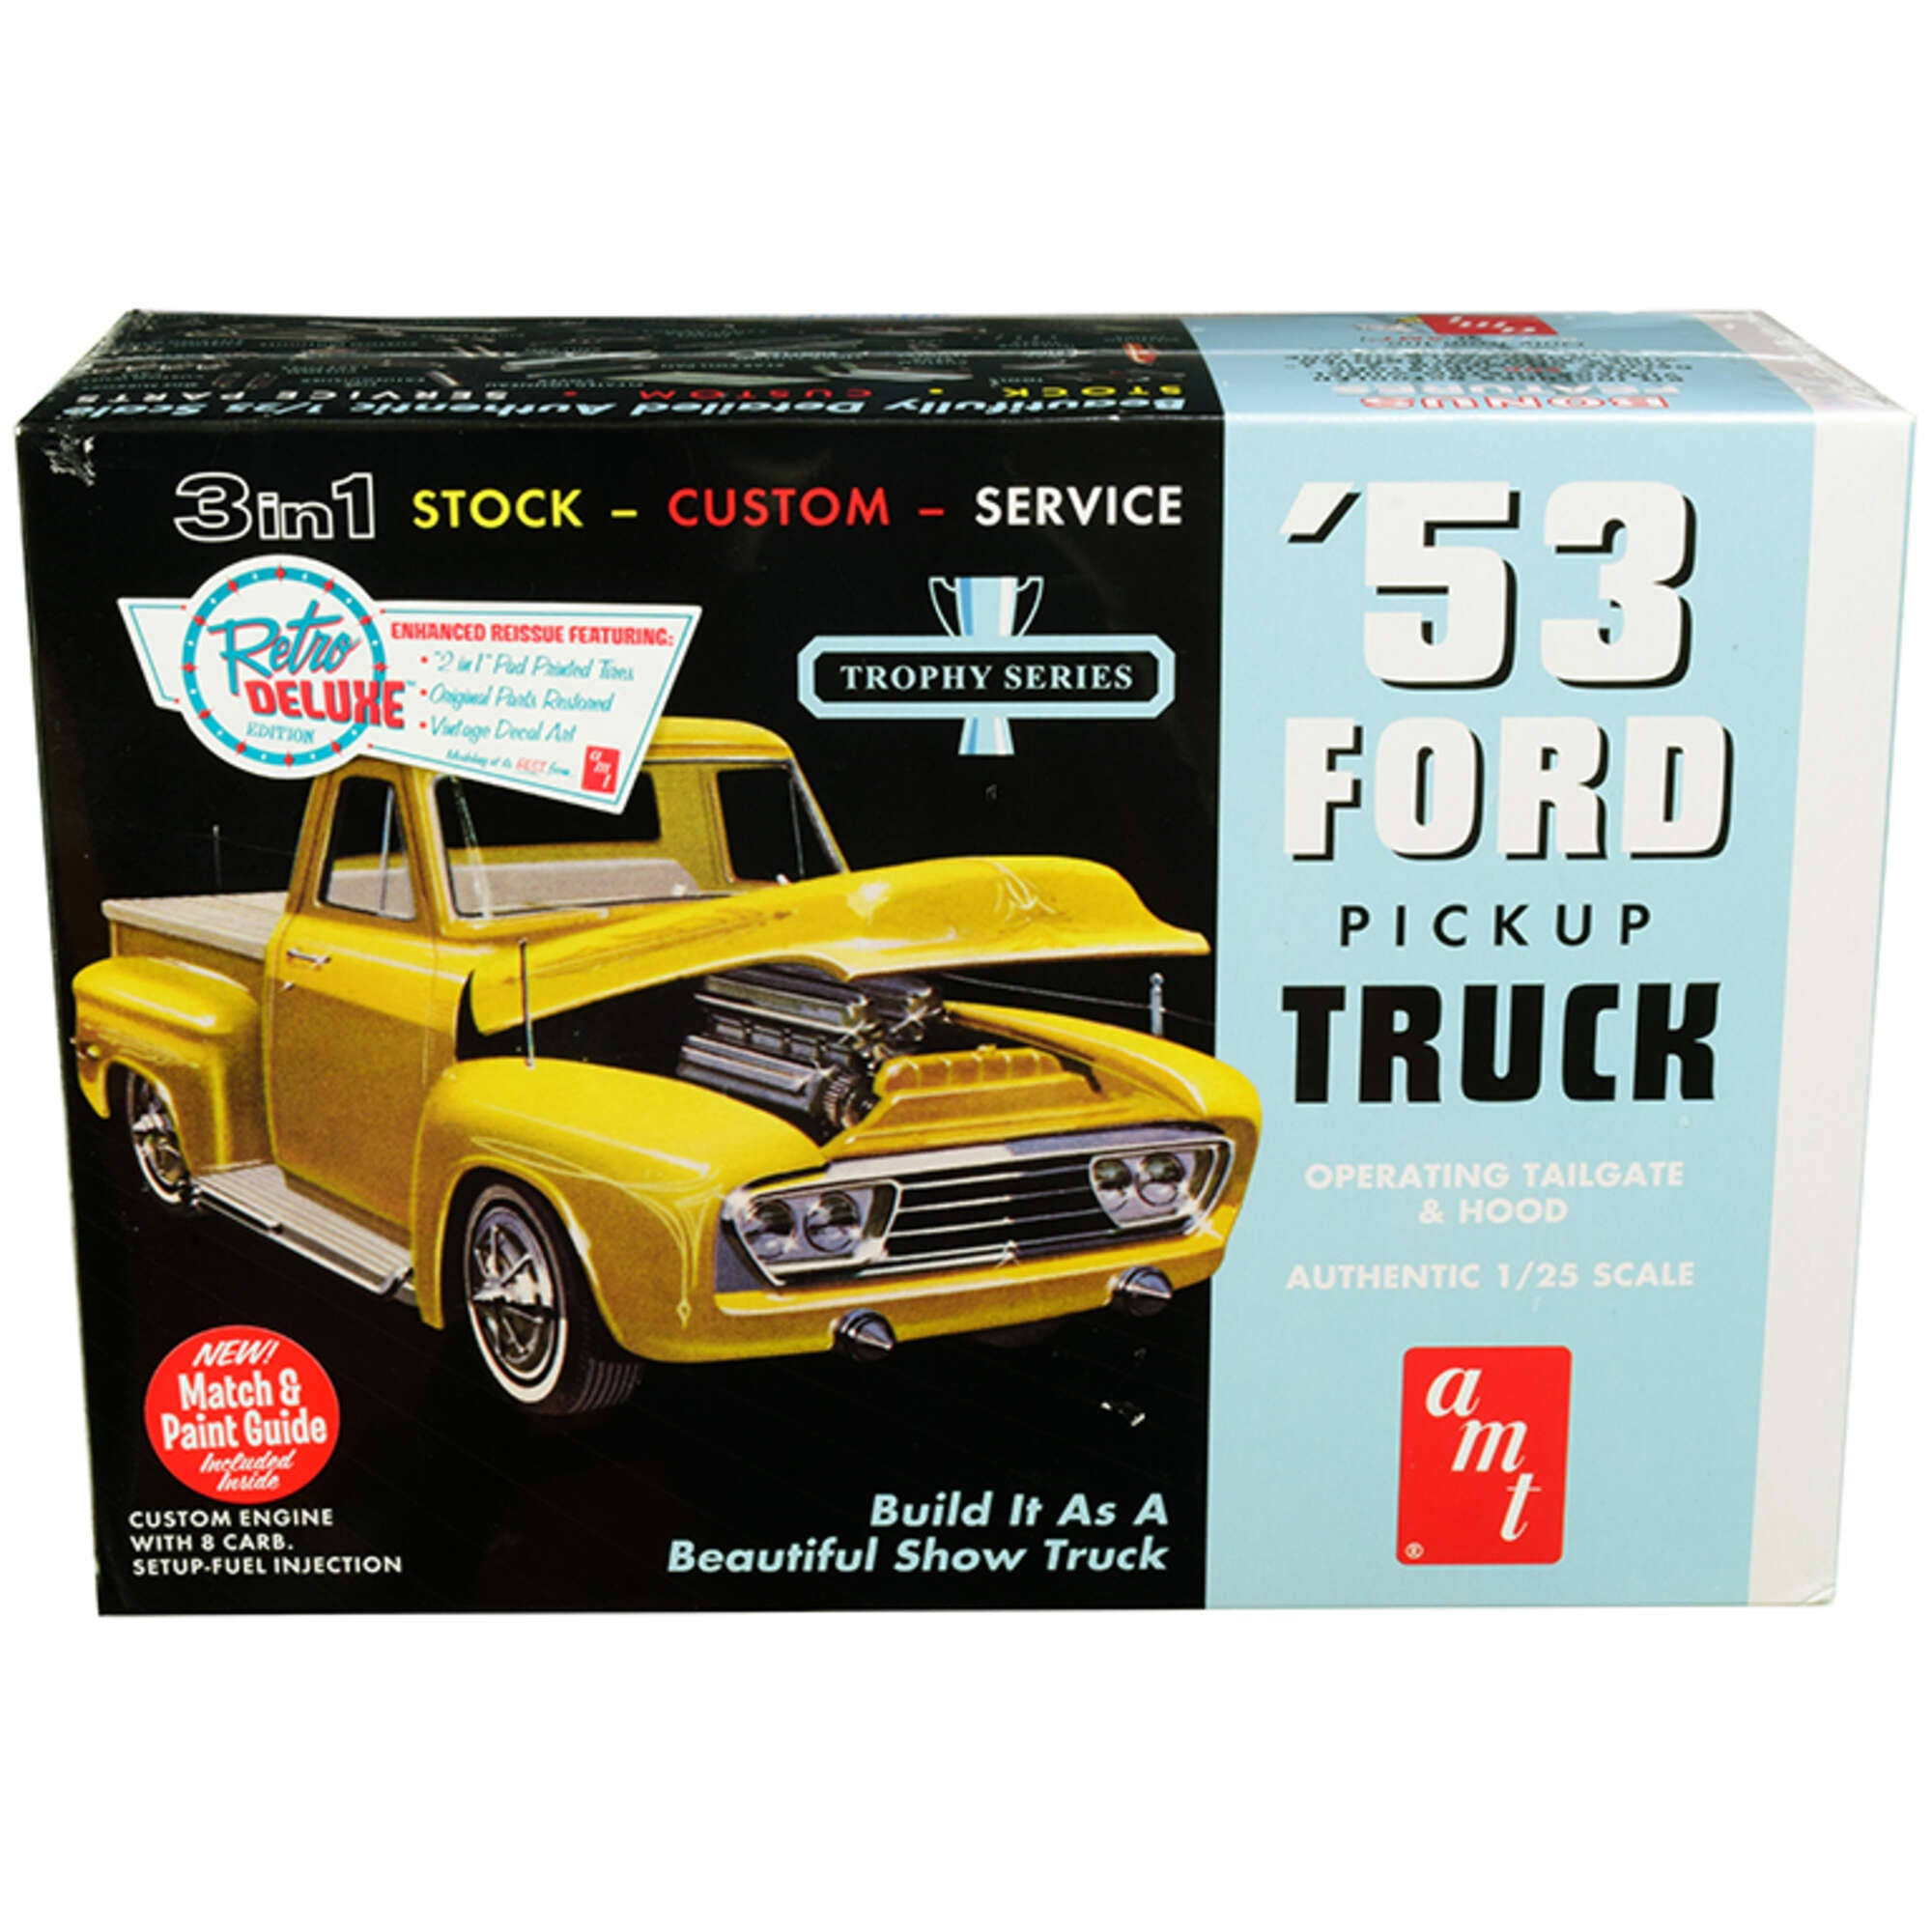 AMT 1953 Ford Pickup Truck 2 in 1 Customizing Model Kit - 1:25 Scale